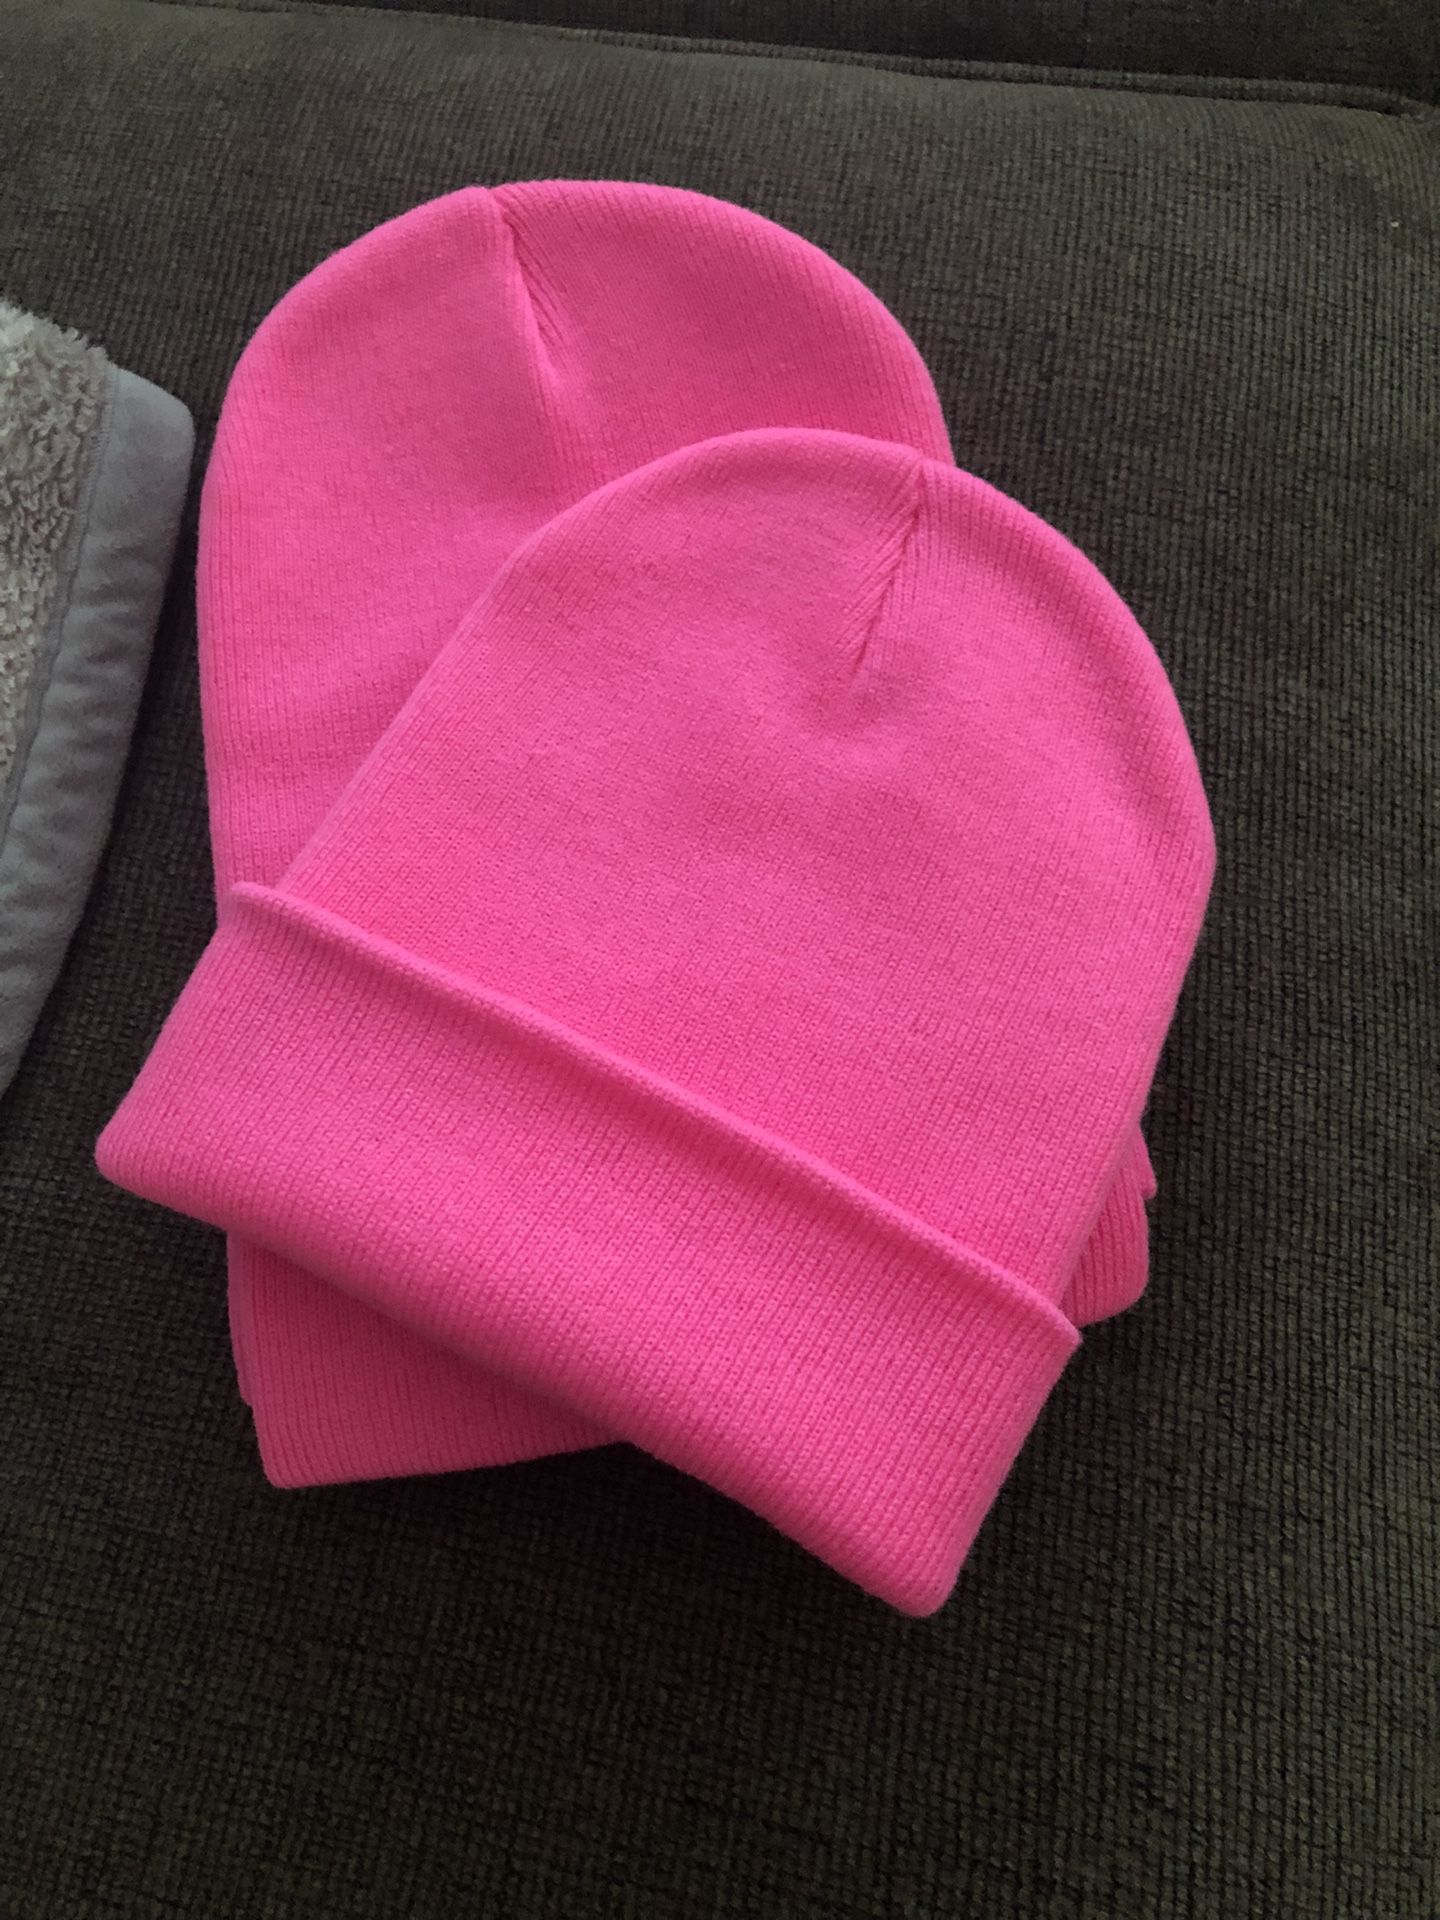 NEW Pink Knit Hats